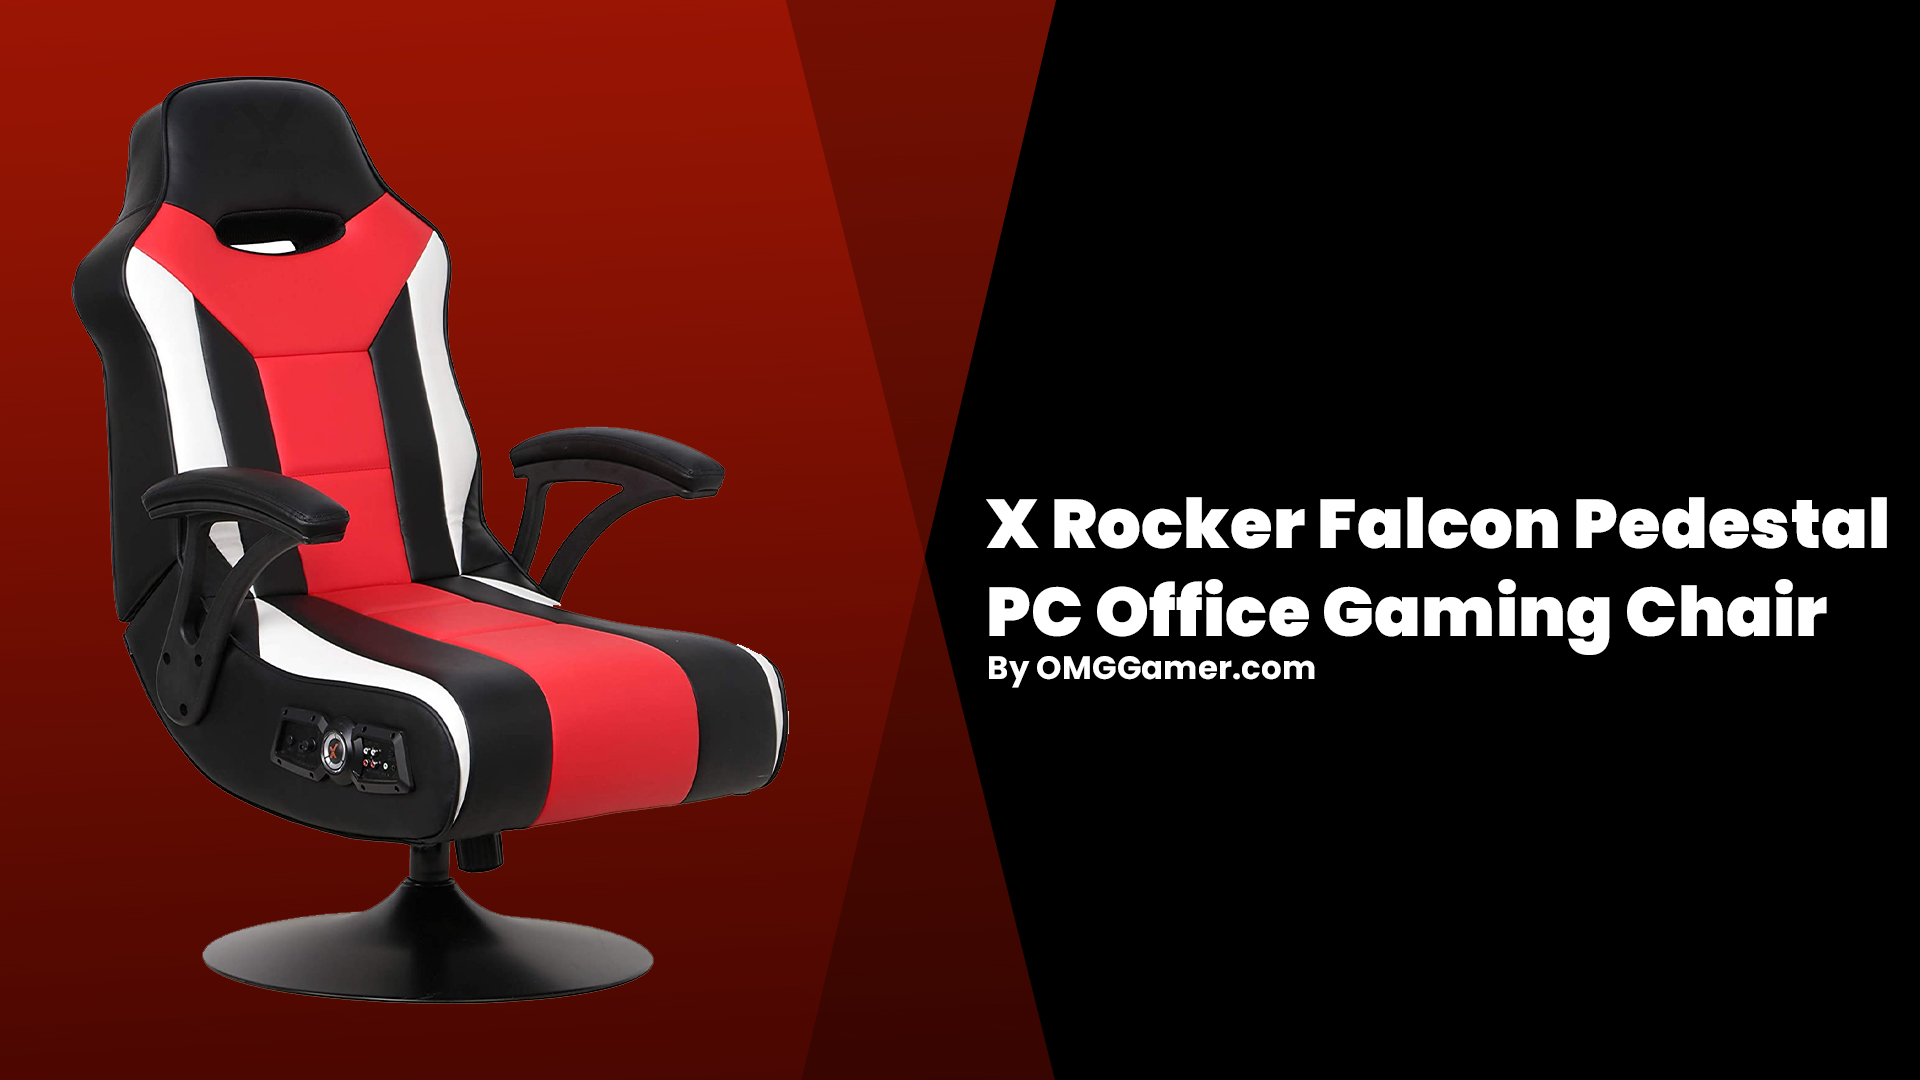 X Rocker Falcon Pedestal PC Office: Red and Black Gaming Chair